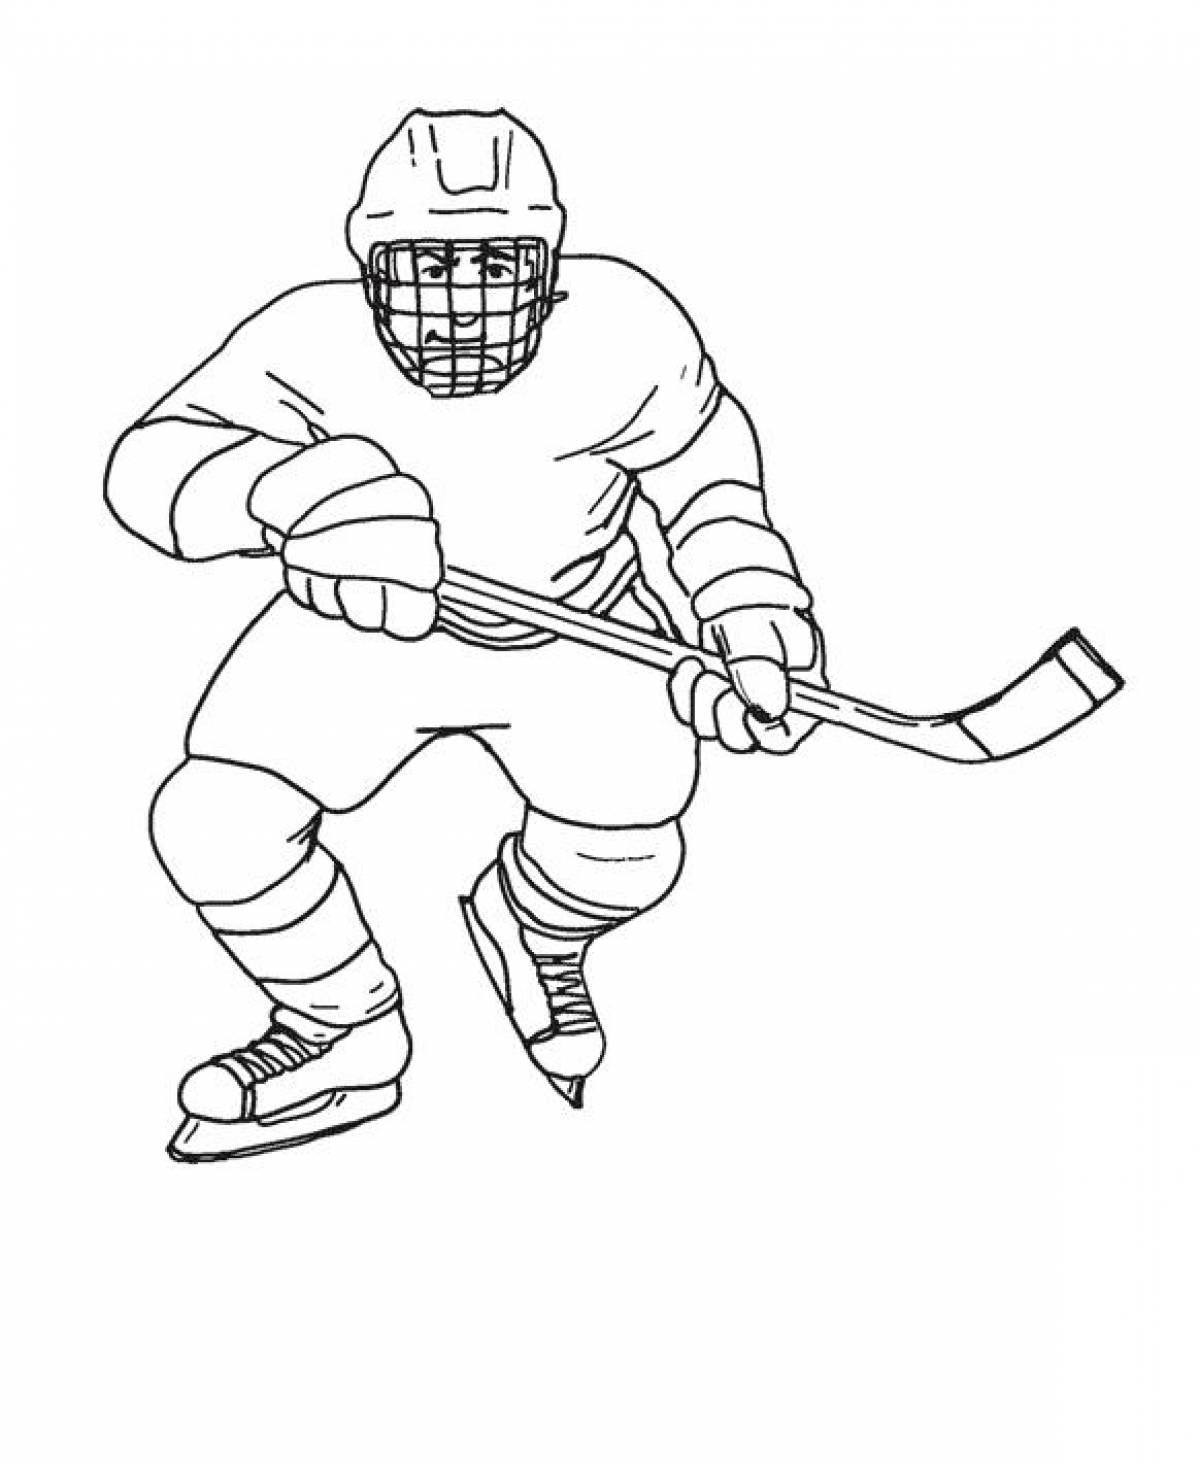 Hockey player in the game